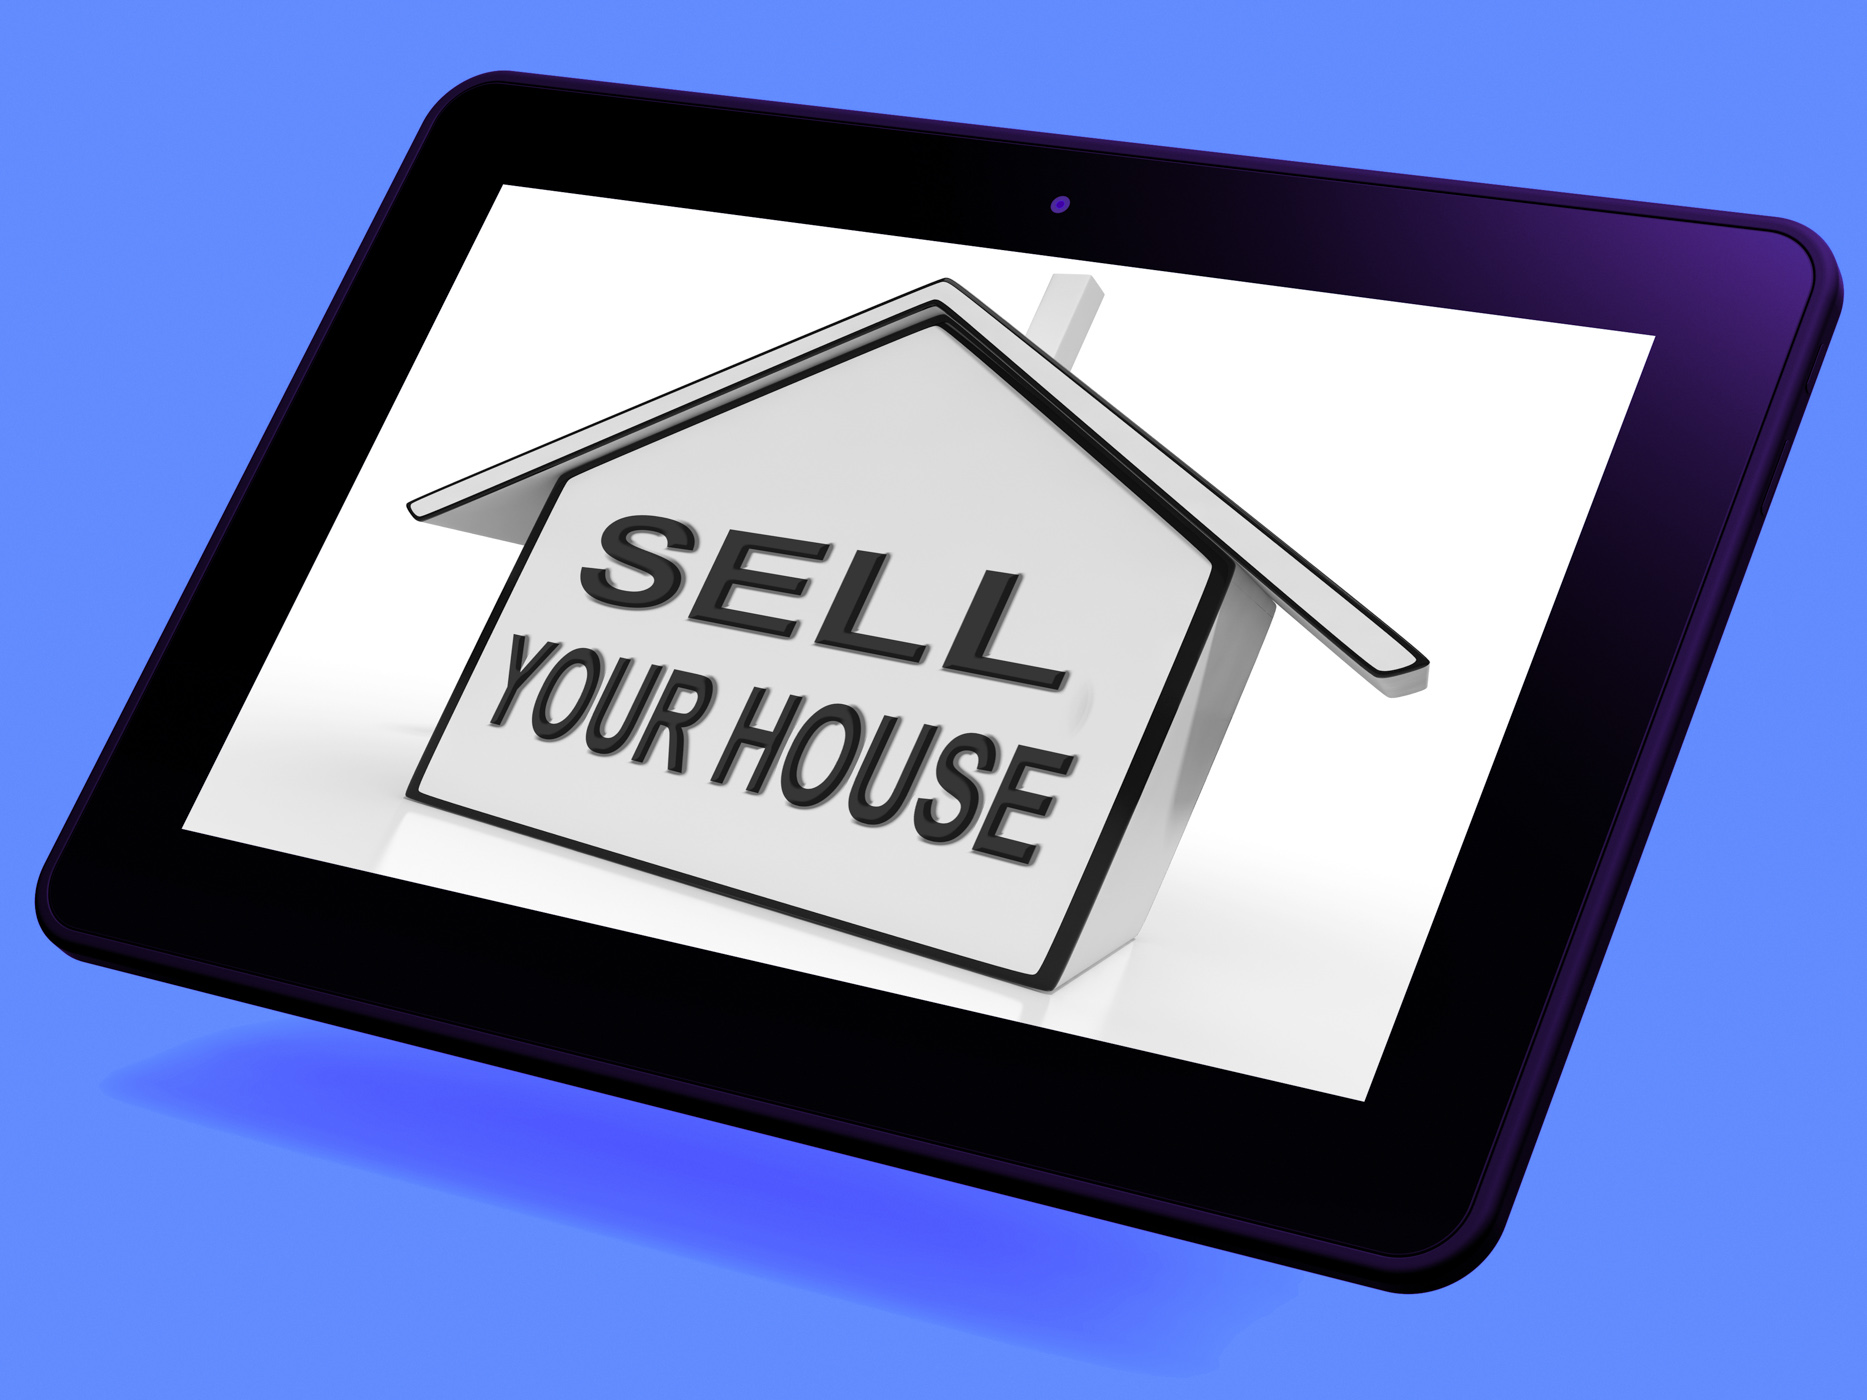 Sell your house home tablet shows listing real estate photo